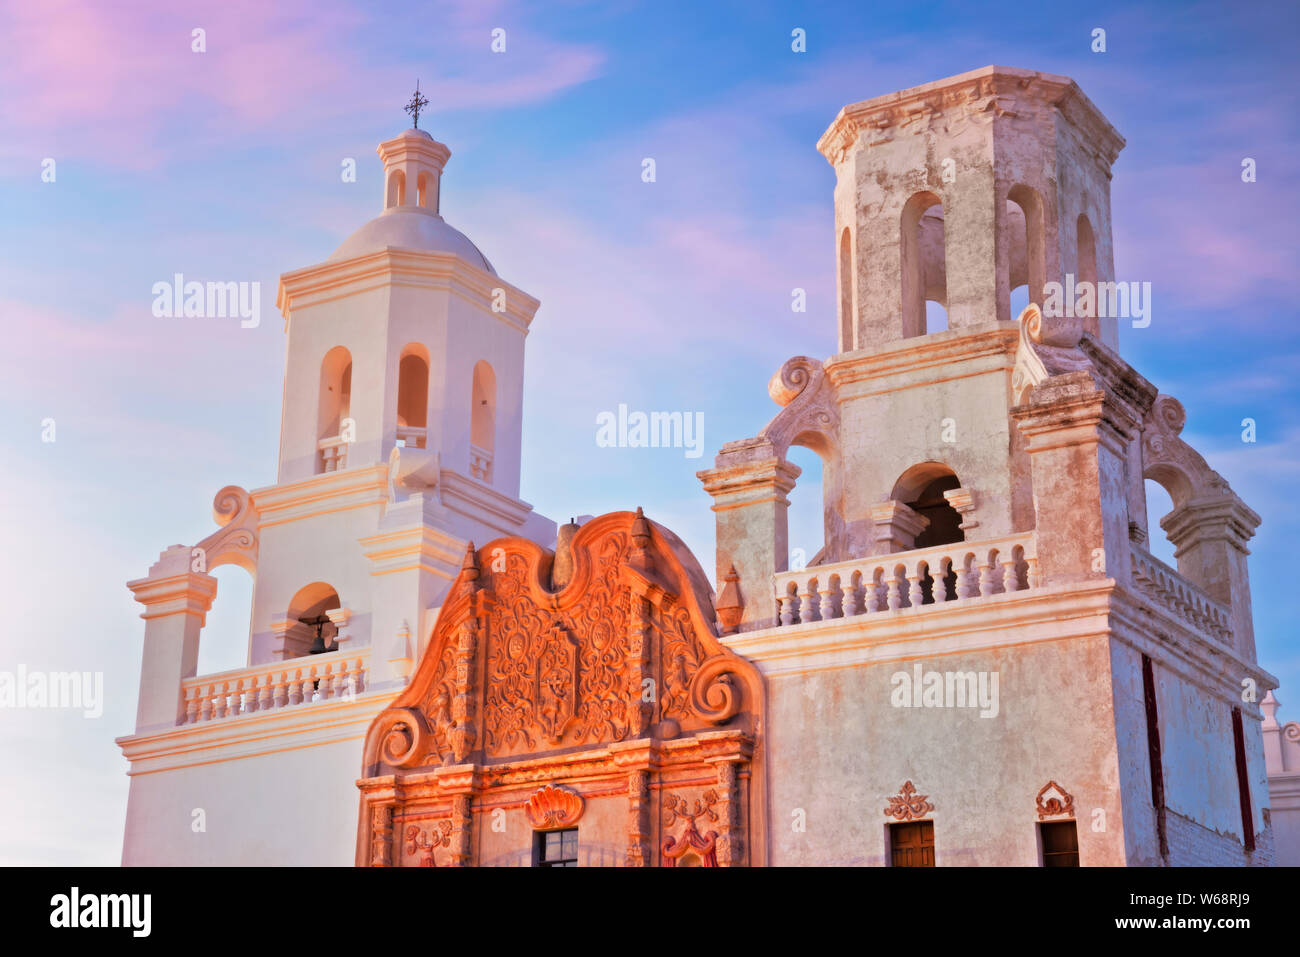 Sunset glow on the Mission San Xavier del Bac which dates to 1783 near Tucson, Arizona. Stock Photo